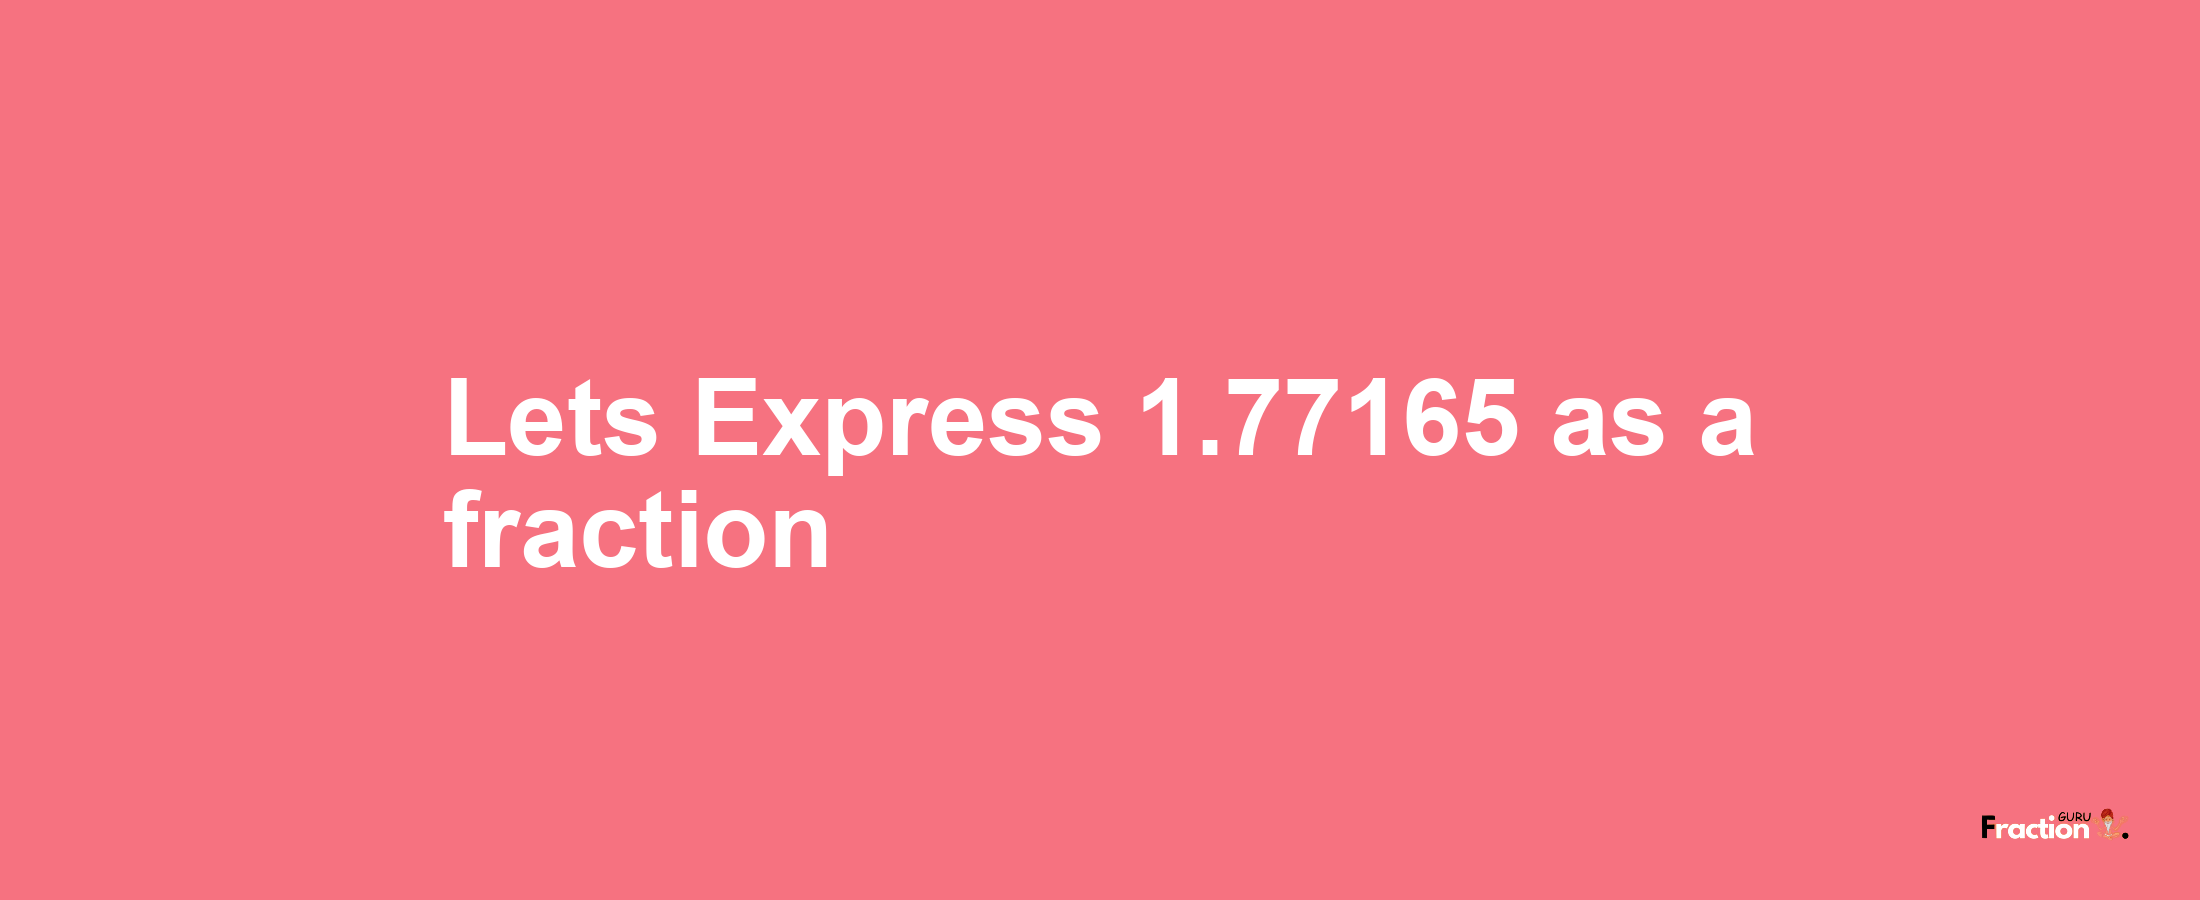 Lets Express 1.77165 as afraction